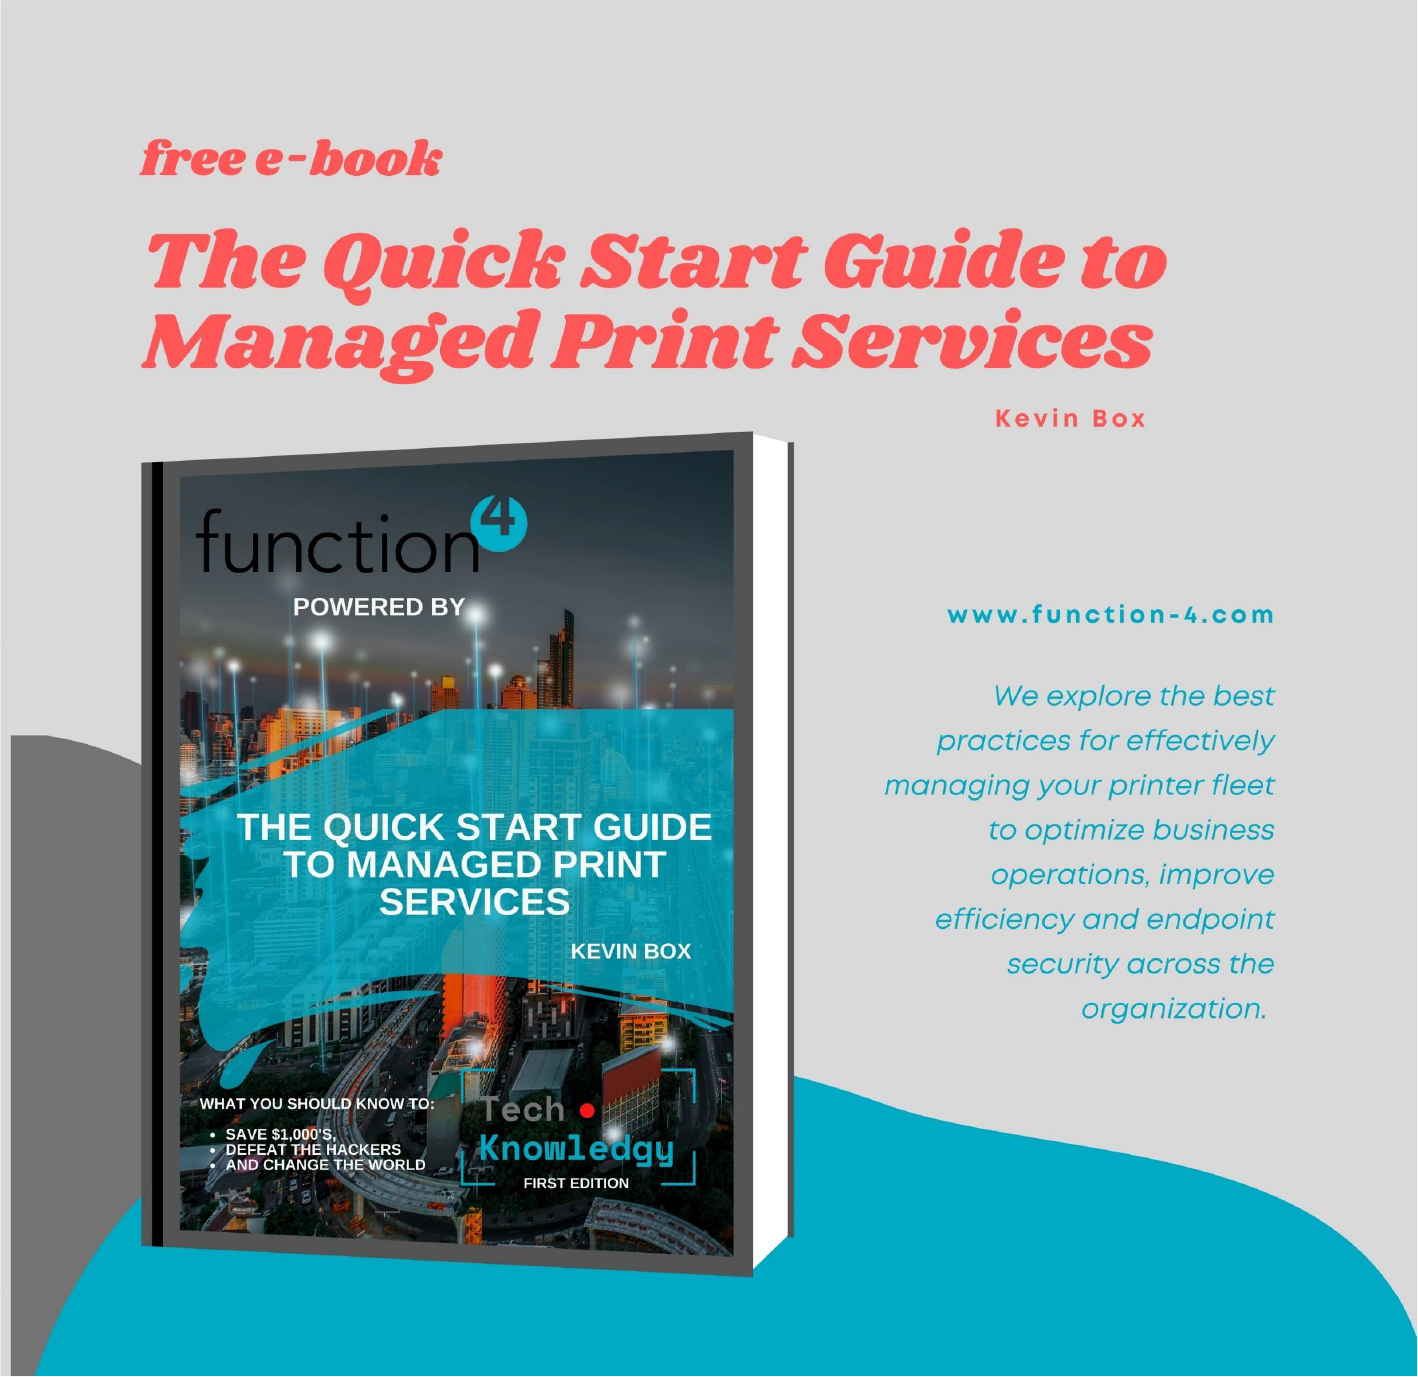 Free E-Book 'The Quick Start Guide to Managed Print Services' by Kevin Box